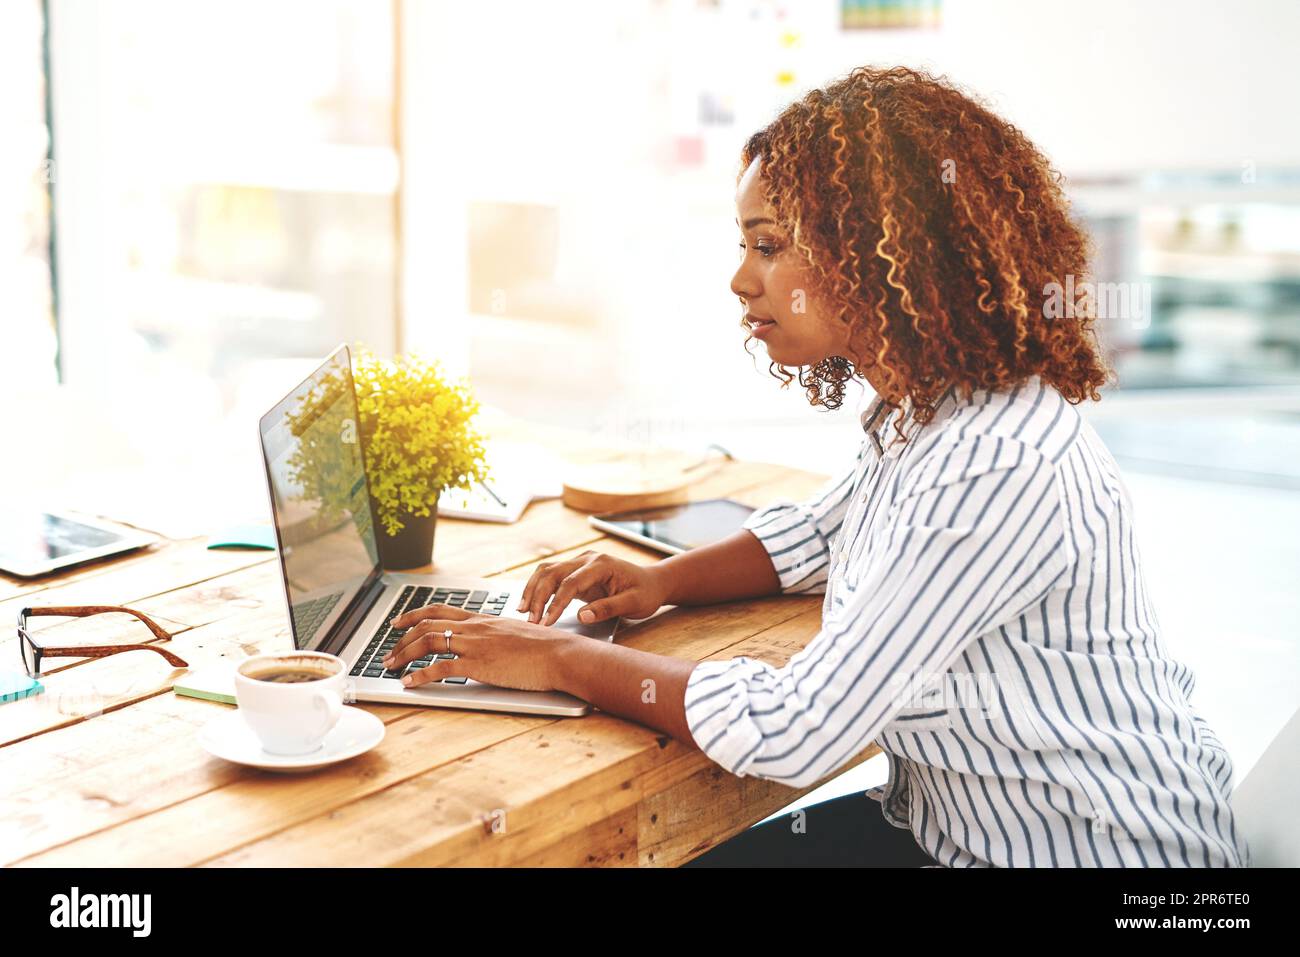 Shes the best in the creative biz. Cropped shot of an attractive young woman using her laptop on a wooden table. Stock Photo